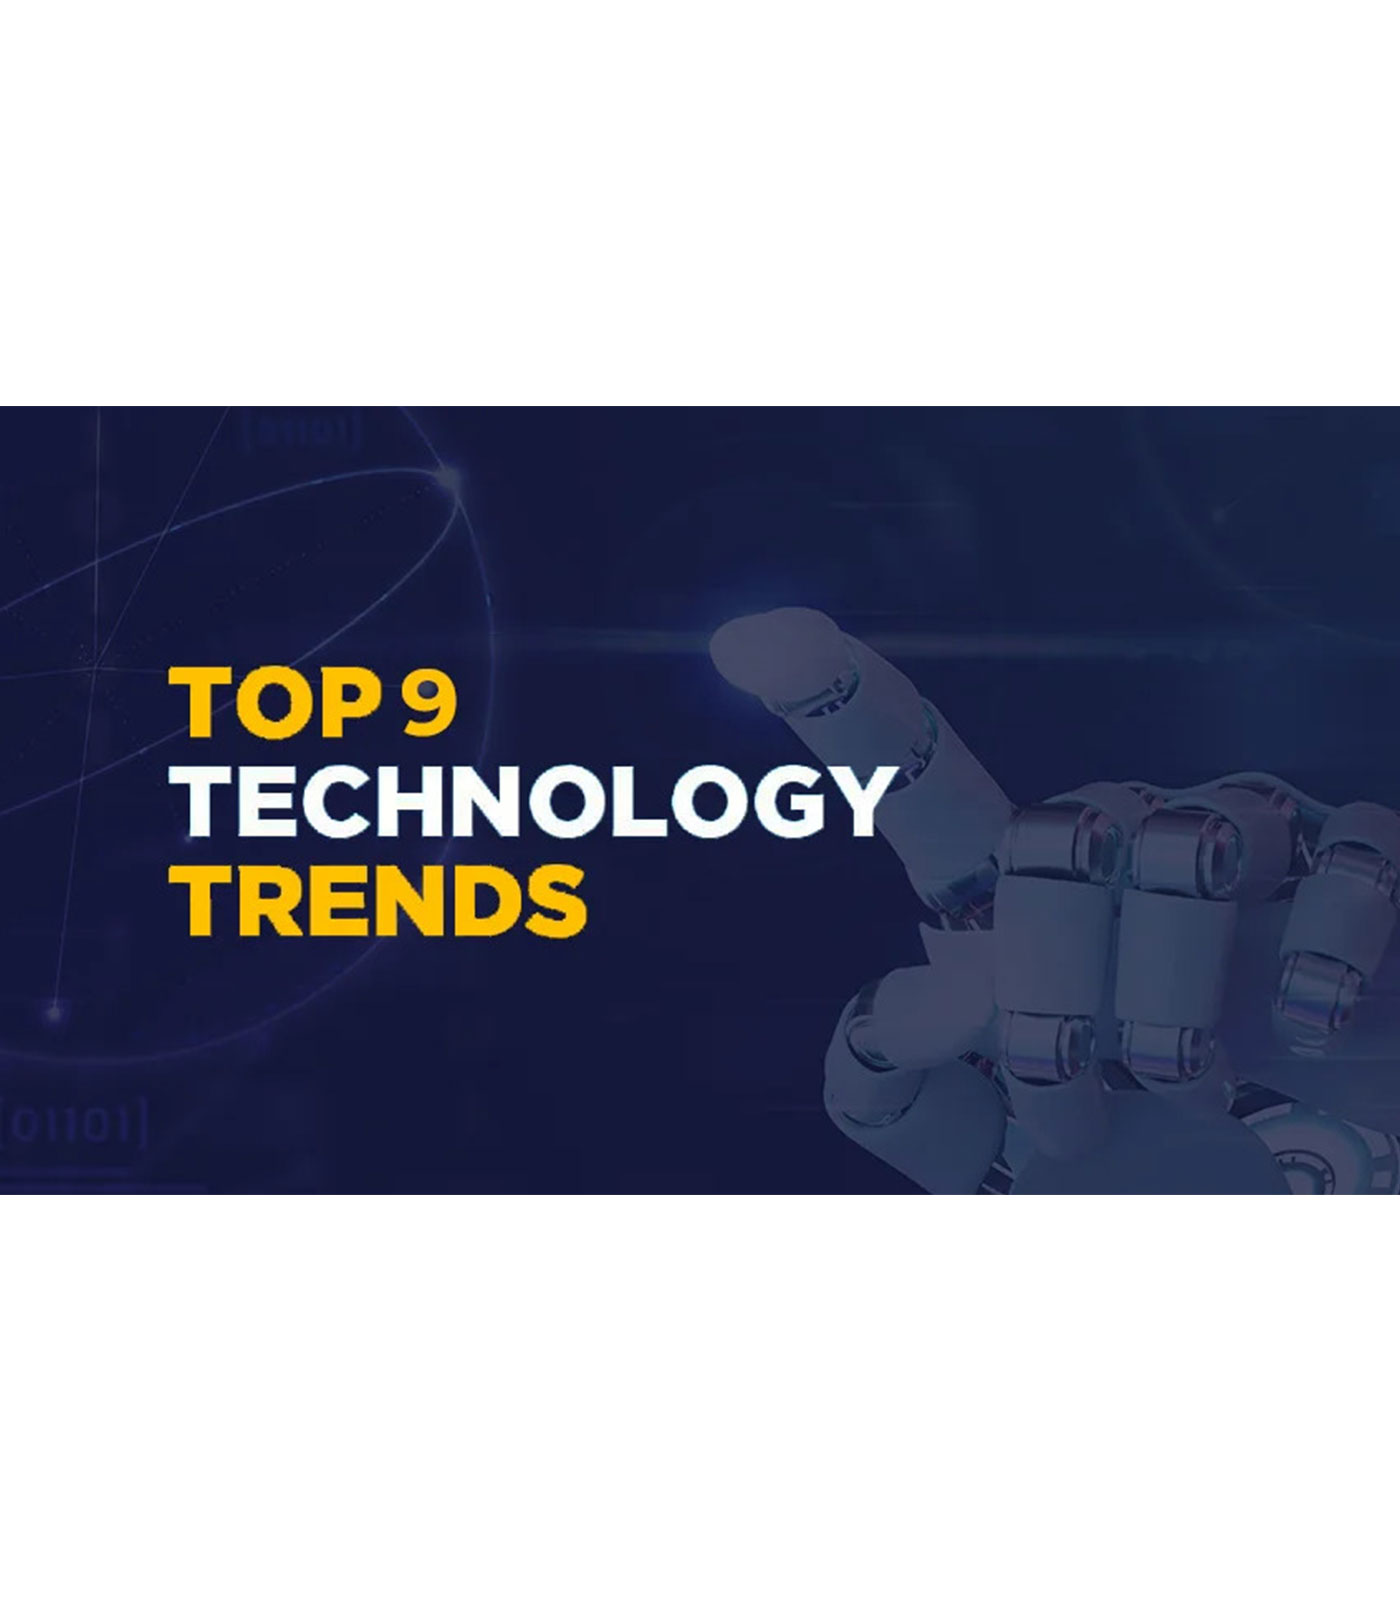 Top 9 Technology Trends in UAE